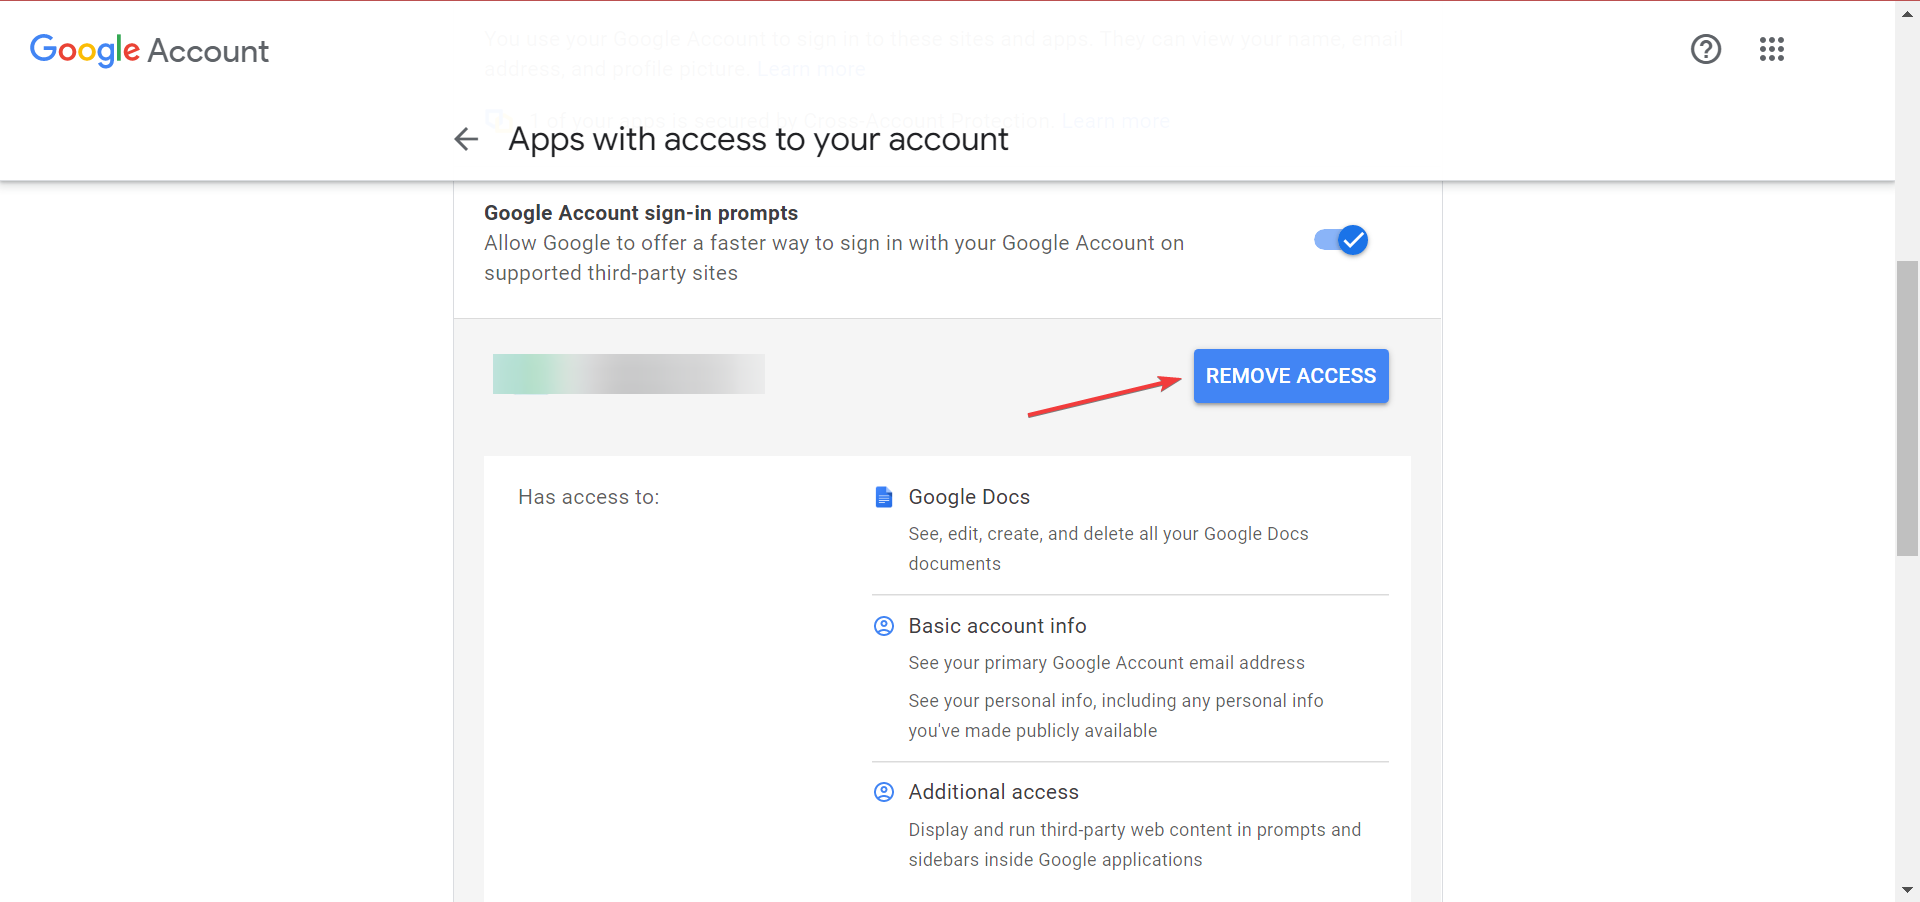 remove access to stop emails going to trash in gmail